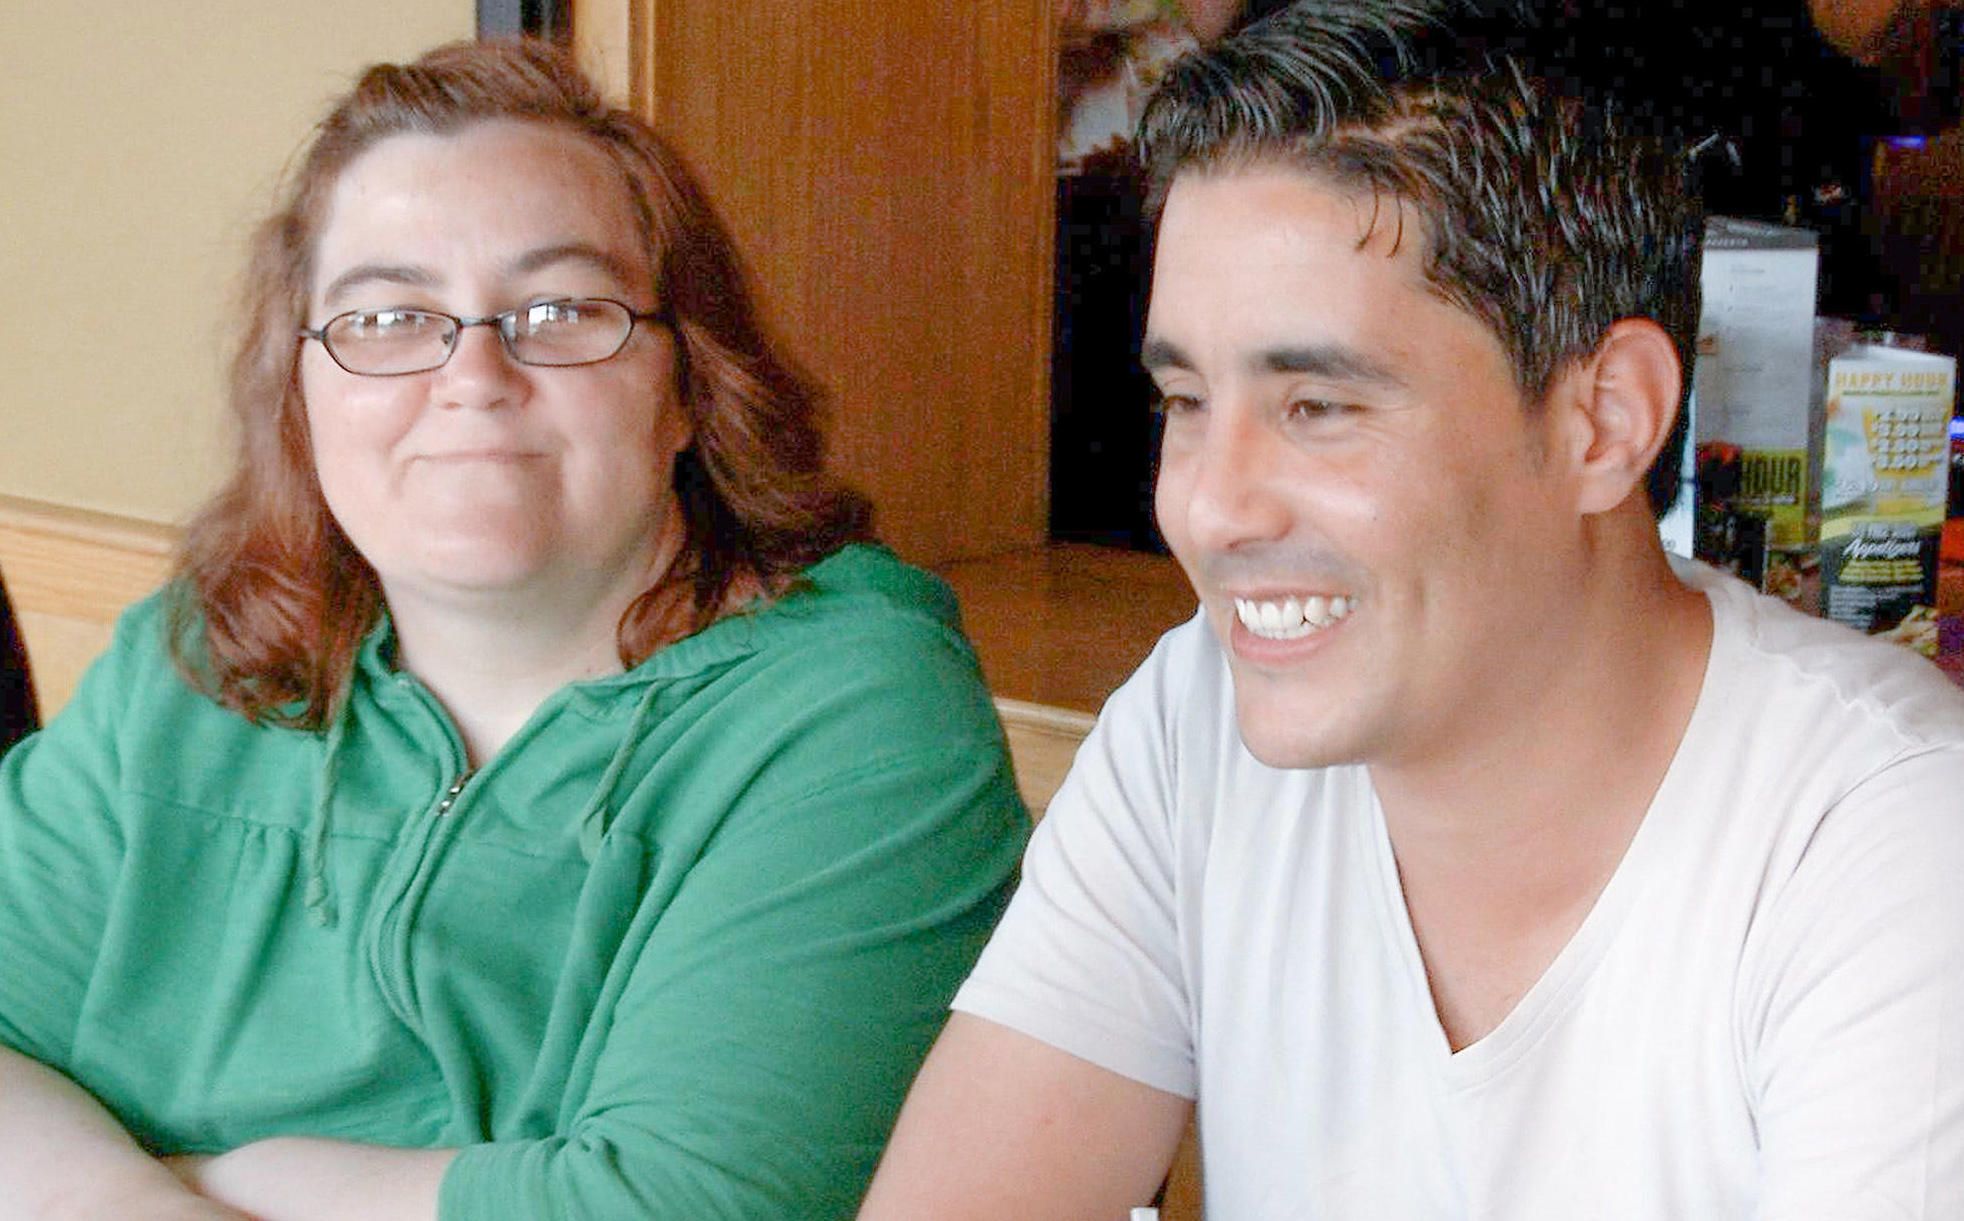 15 Dark Secrets You Didnt Know About 90 Day Fiancé